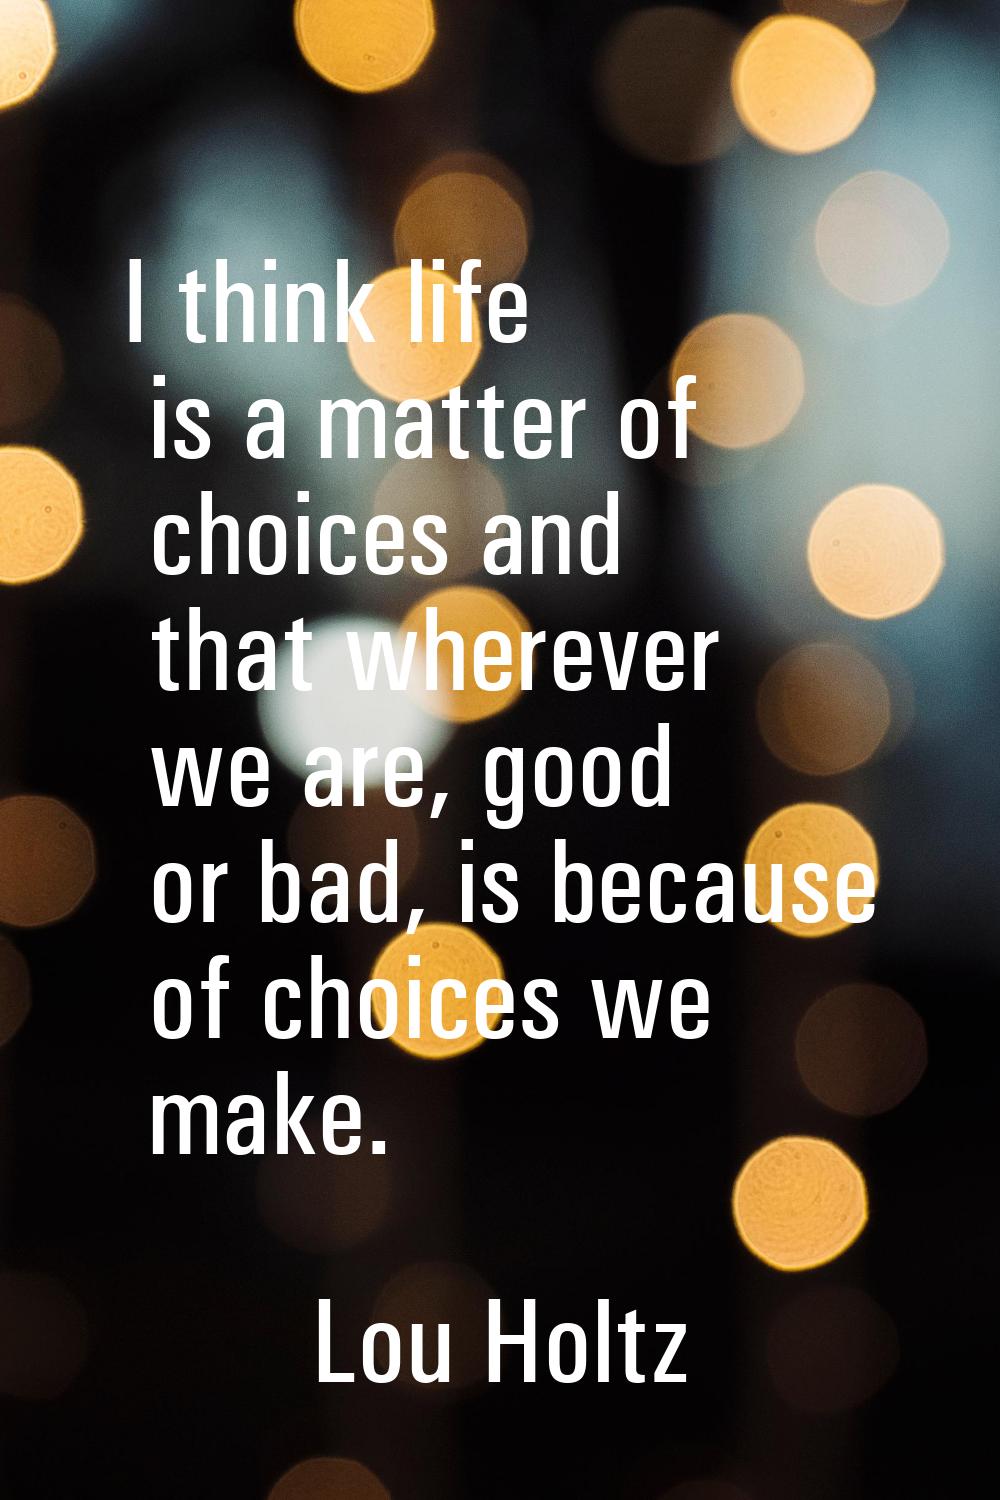 I think life is a matter of choices and that wherever we are, good or bad, is because of choices we